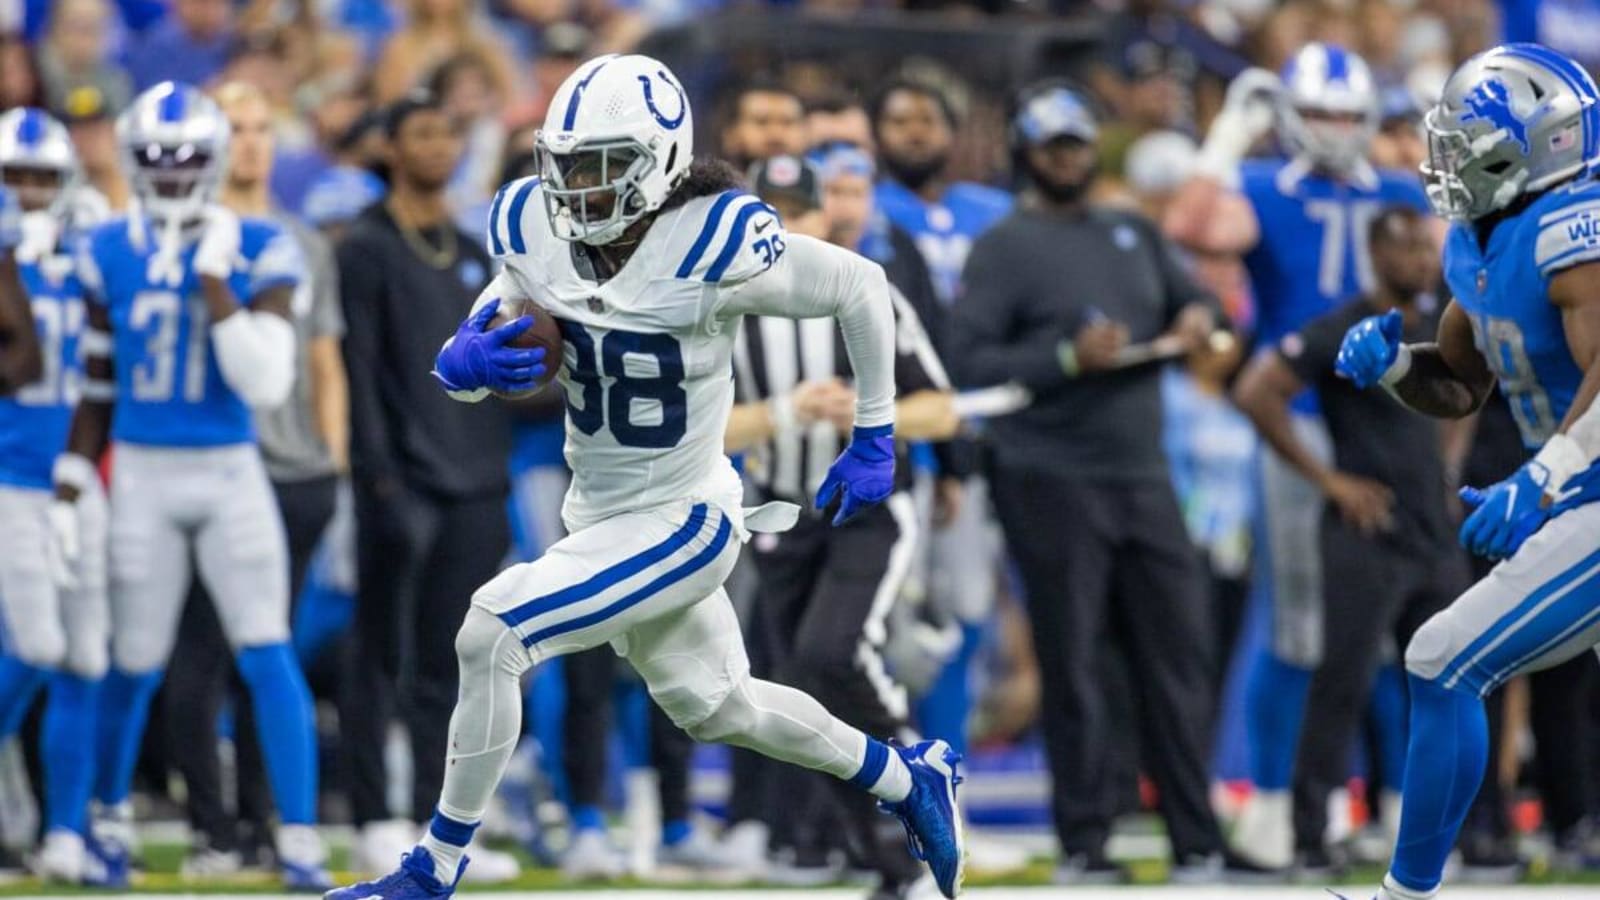 Colts Re-Sign Special Teams Standout Tony Brown